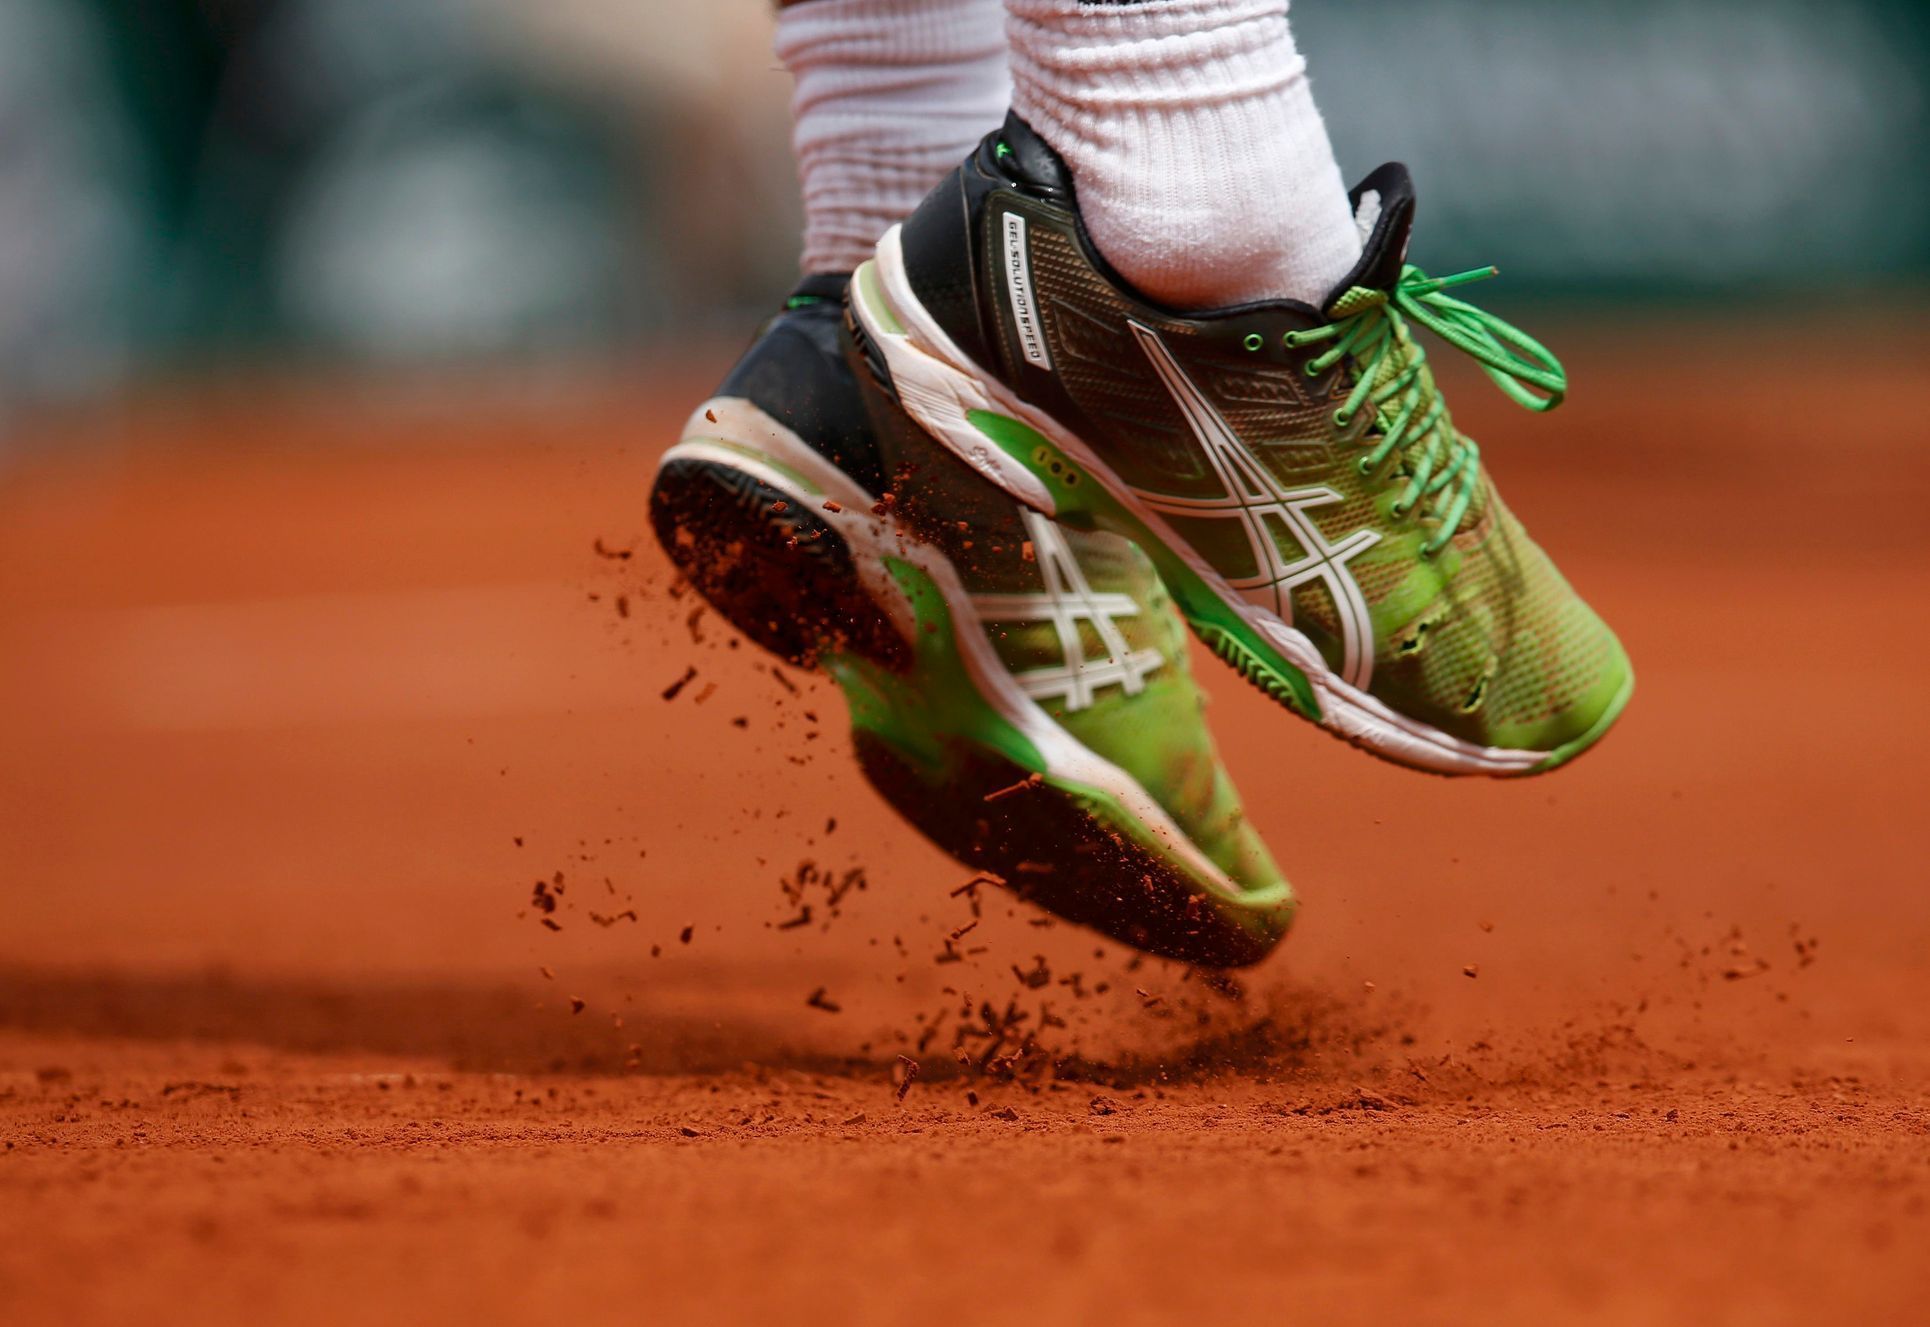 Marsel Ilhan of Turkey jumps to play a shot to Stan Wawrinka of Switzerland during their men's singles match at the French Open tennis tournament at the Roland Garros stadium in Paris